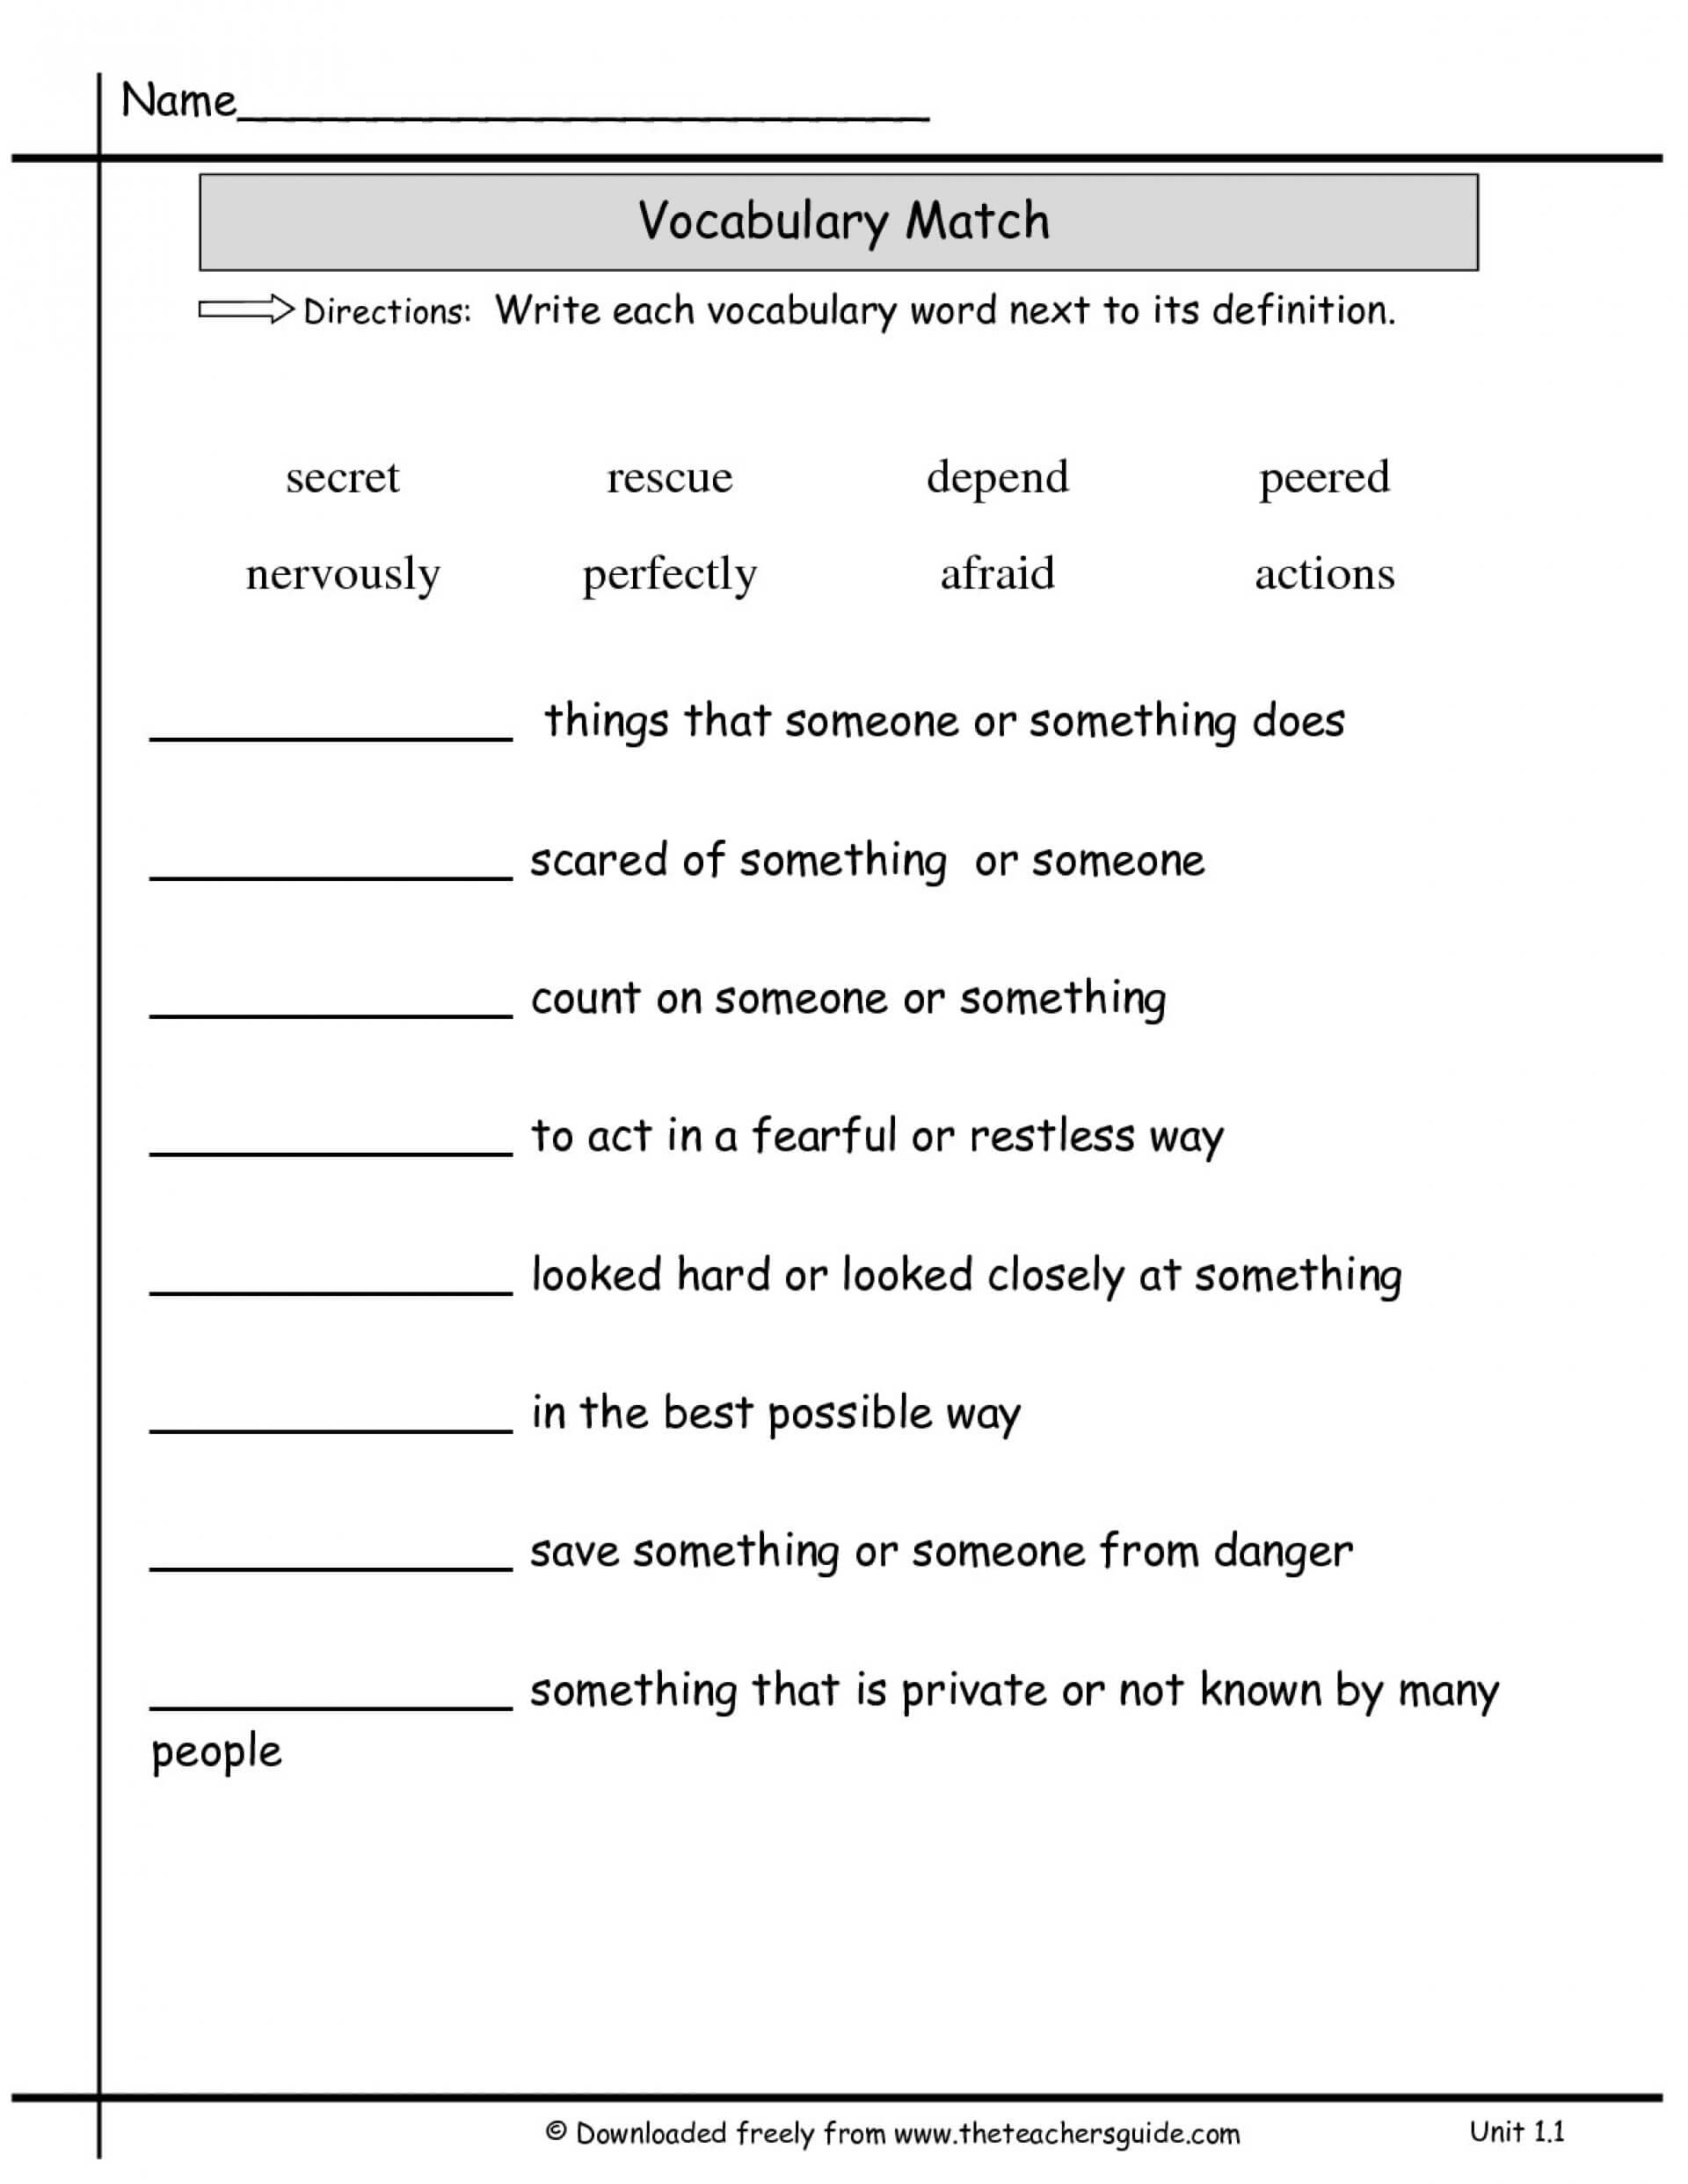 015 Maxresdefault Matching Test Template Microsoft Word Within Test Template For Word